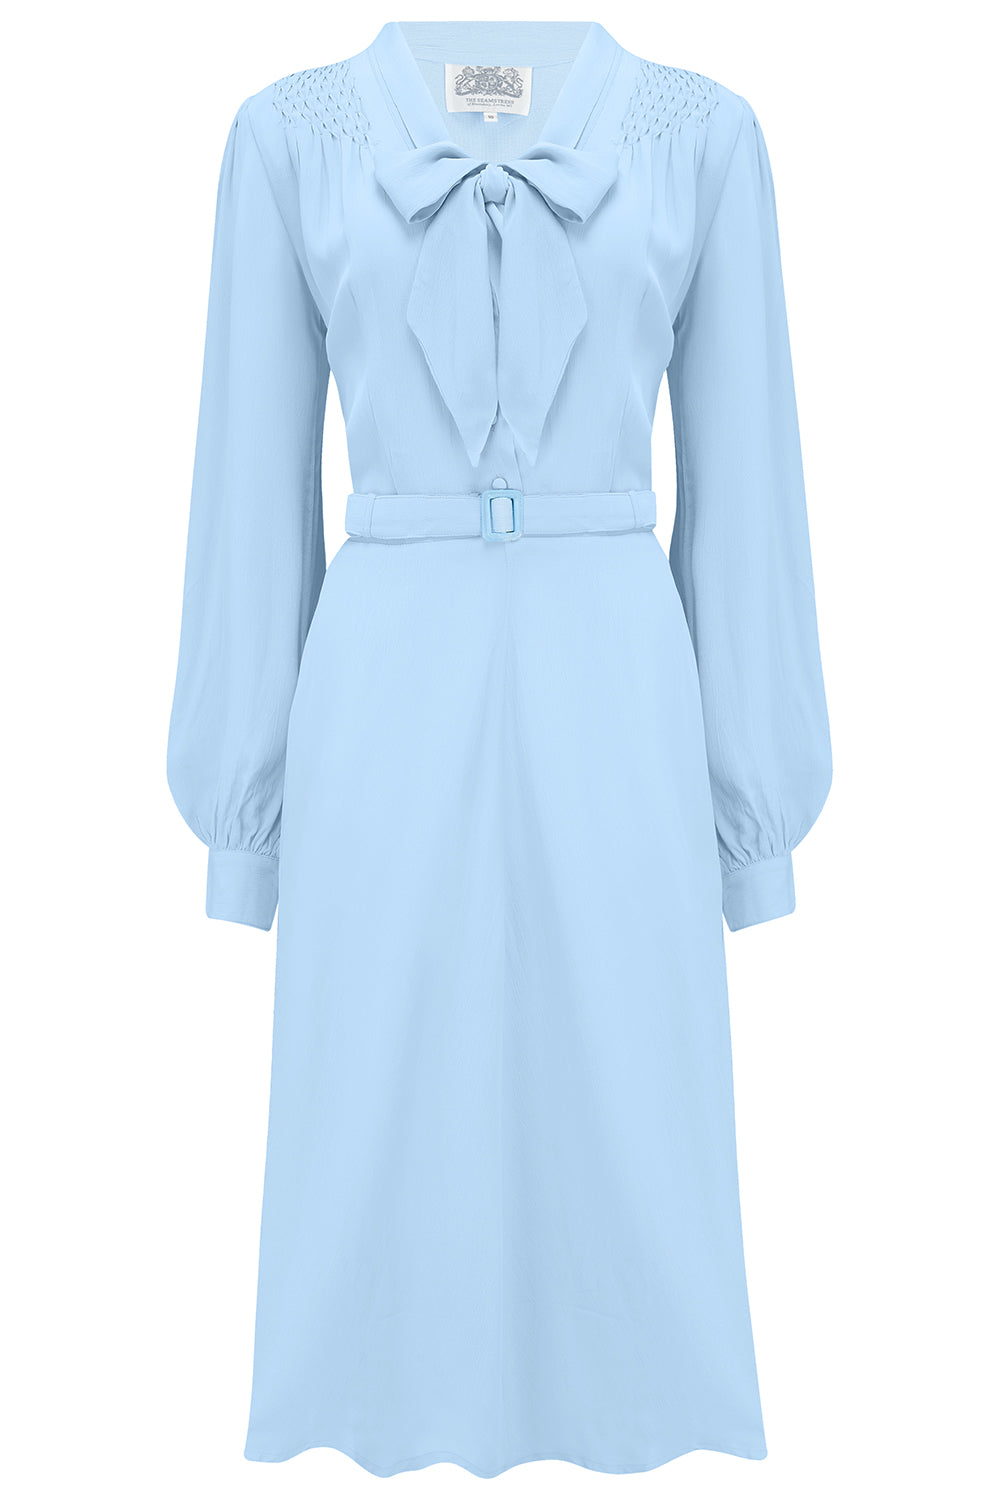 "Eva" Dress in Powder Blue , Classic 1940's Style Long Sleeve Dress with Tie Neck - True and authentic vintage style clothing, inspired by the Classic styles of CC41 , WW2 and the fun 1950s RocknRoll era, for everyday wear plus events like Goodwood Revival, Twinwood Festival and Viva Las Vegas Rockabilly Weekend Rock n Romance The Seamstress Of Bloomsbury